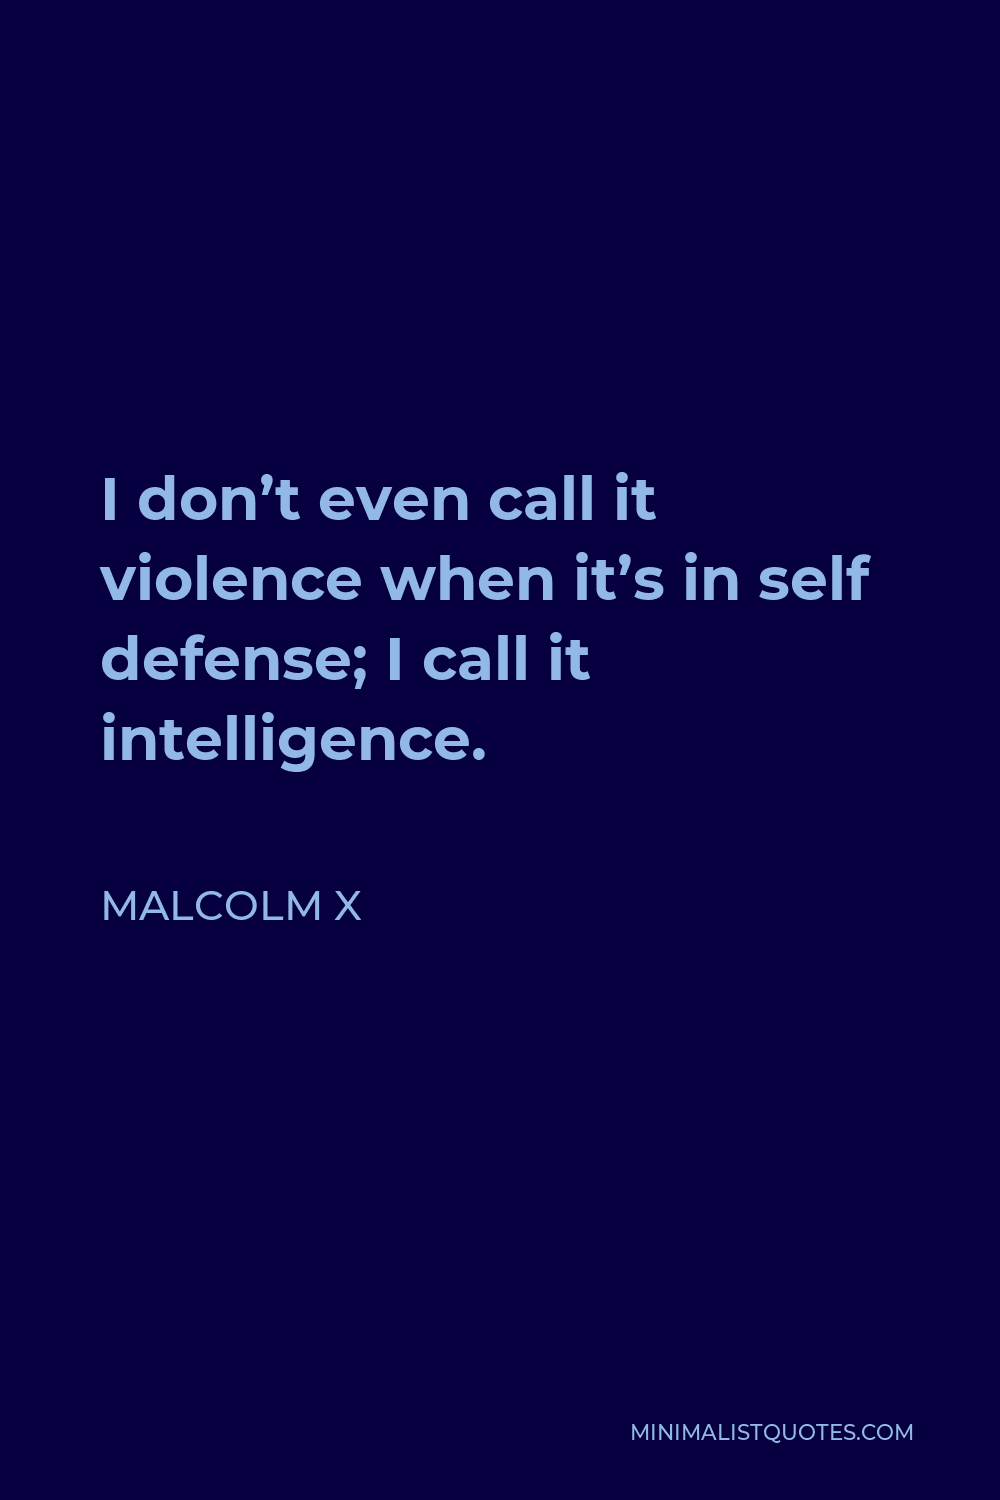 Malcolm X Quote - I don’t even call it violence when it’s in self defense; I call it intelligence.